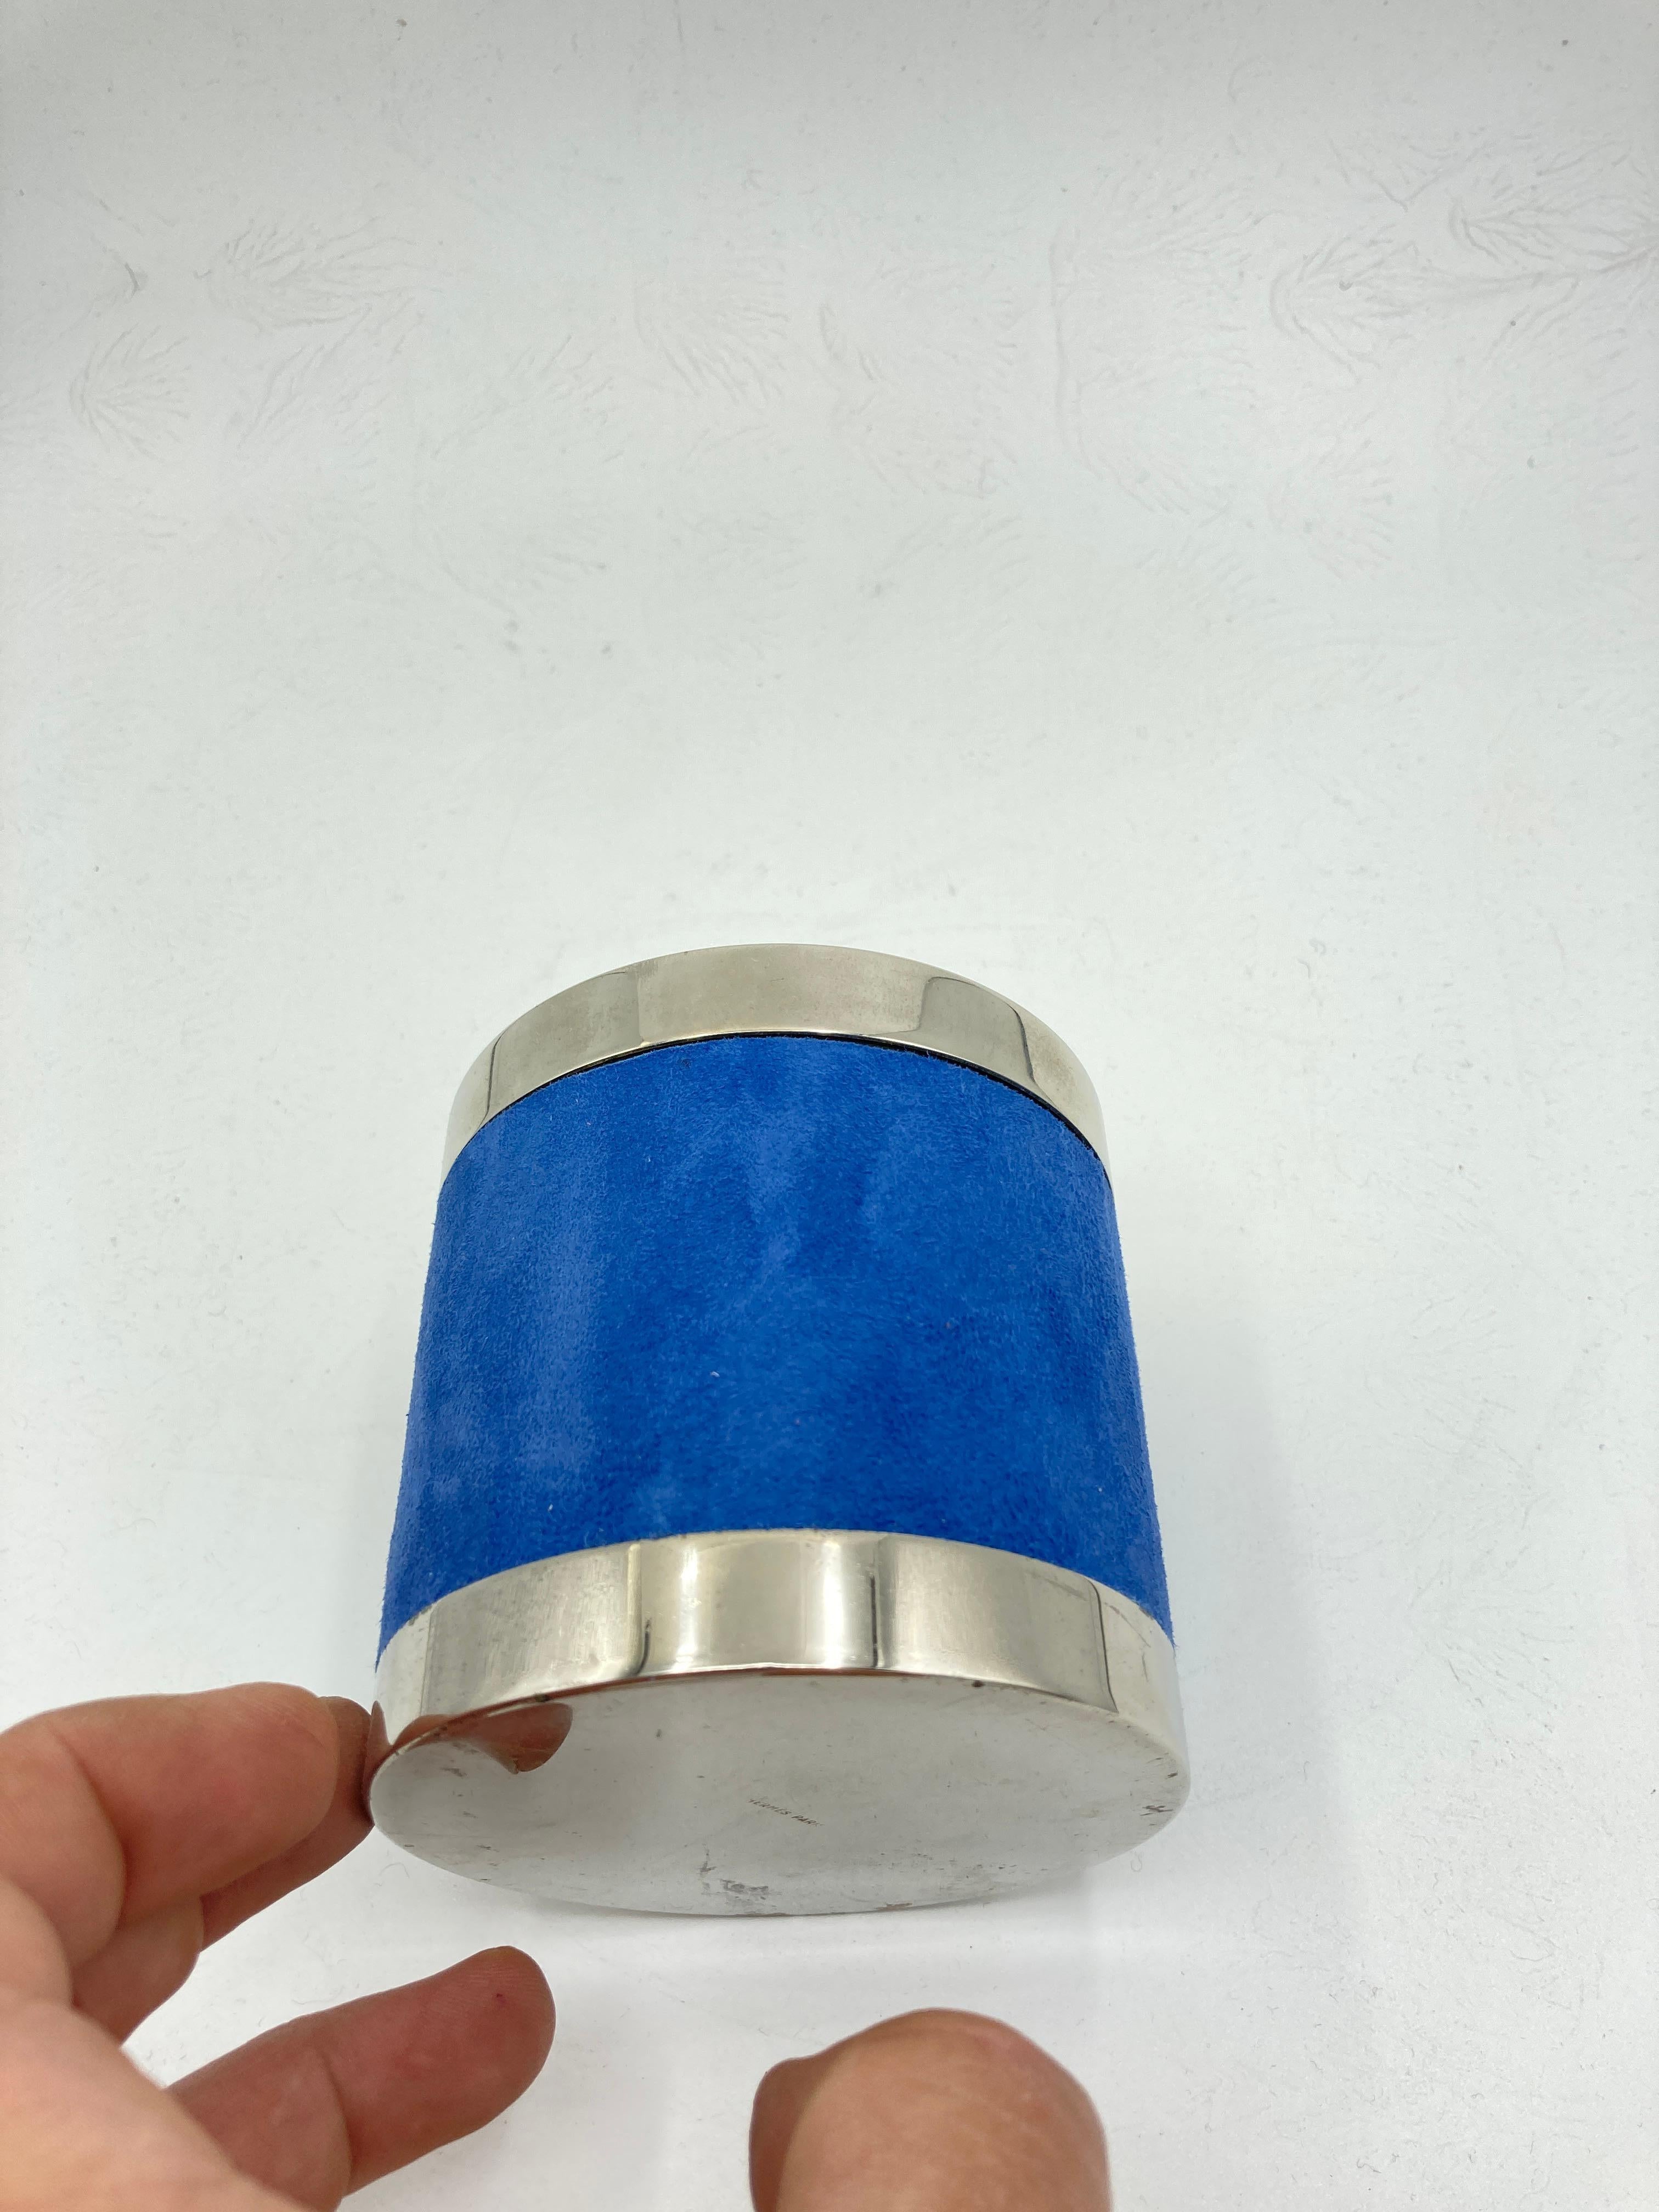 Decorative cigaret boxe covered with blue suede by Maison Hermès In Good Condition For Sale In Bois-Colombes, FR